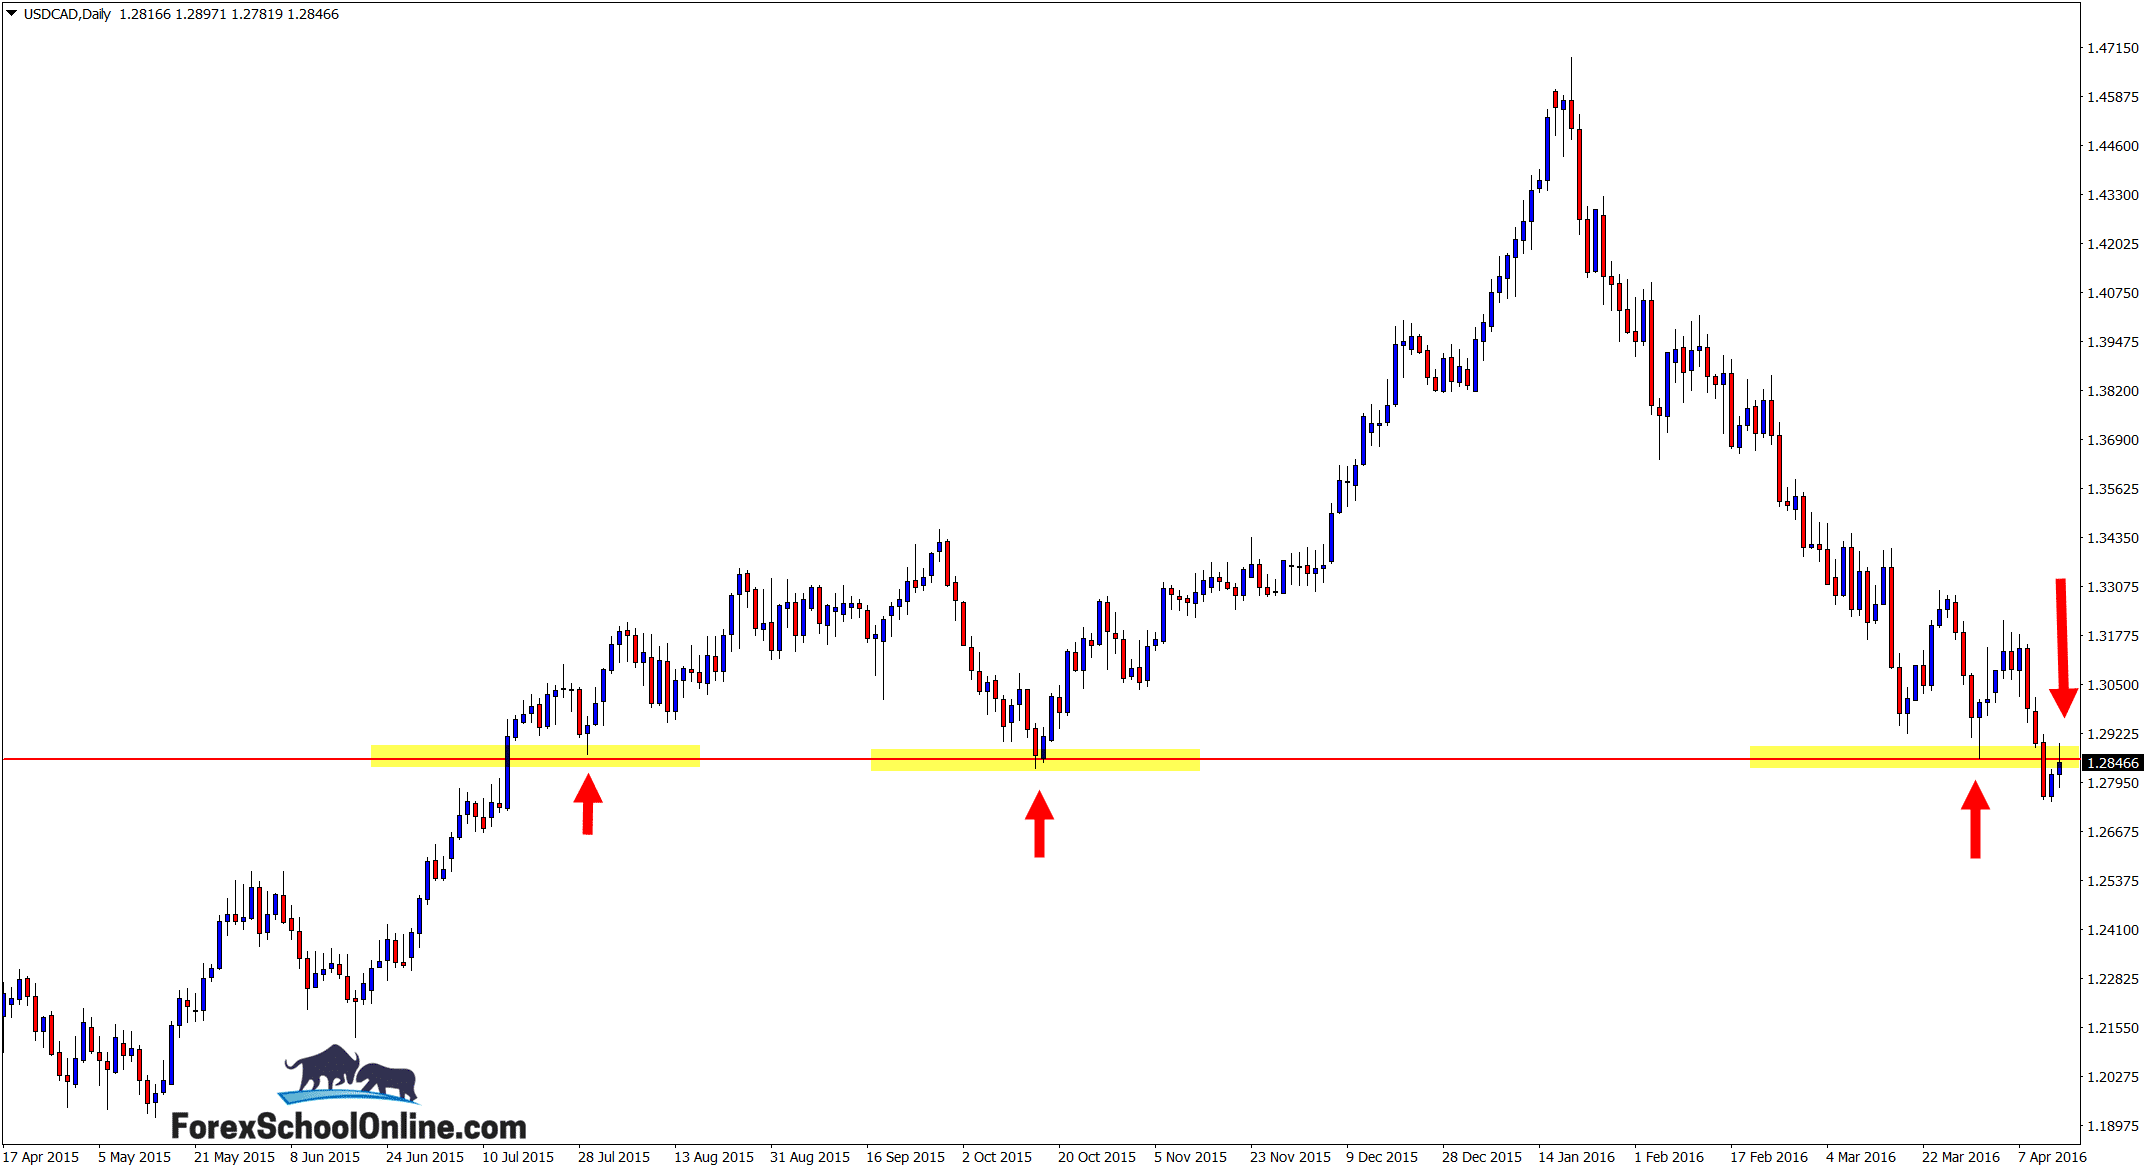 USDCAD DAILY CHART